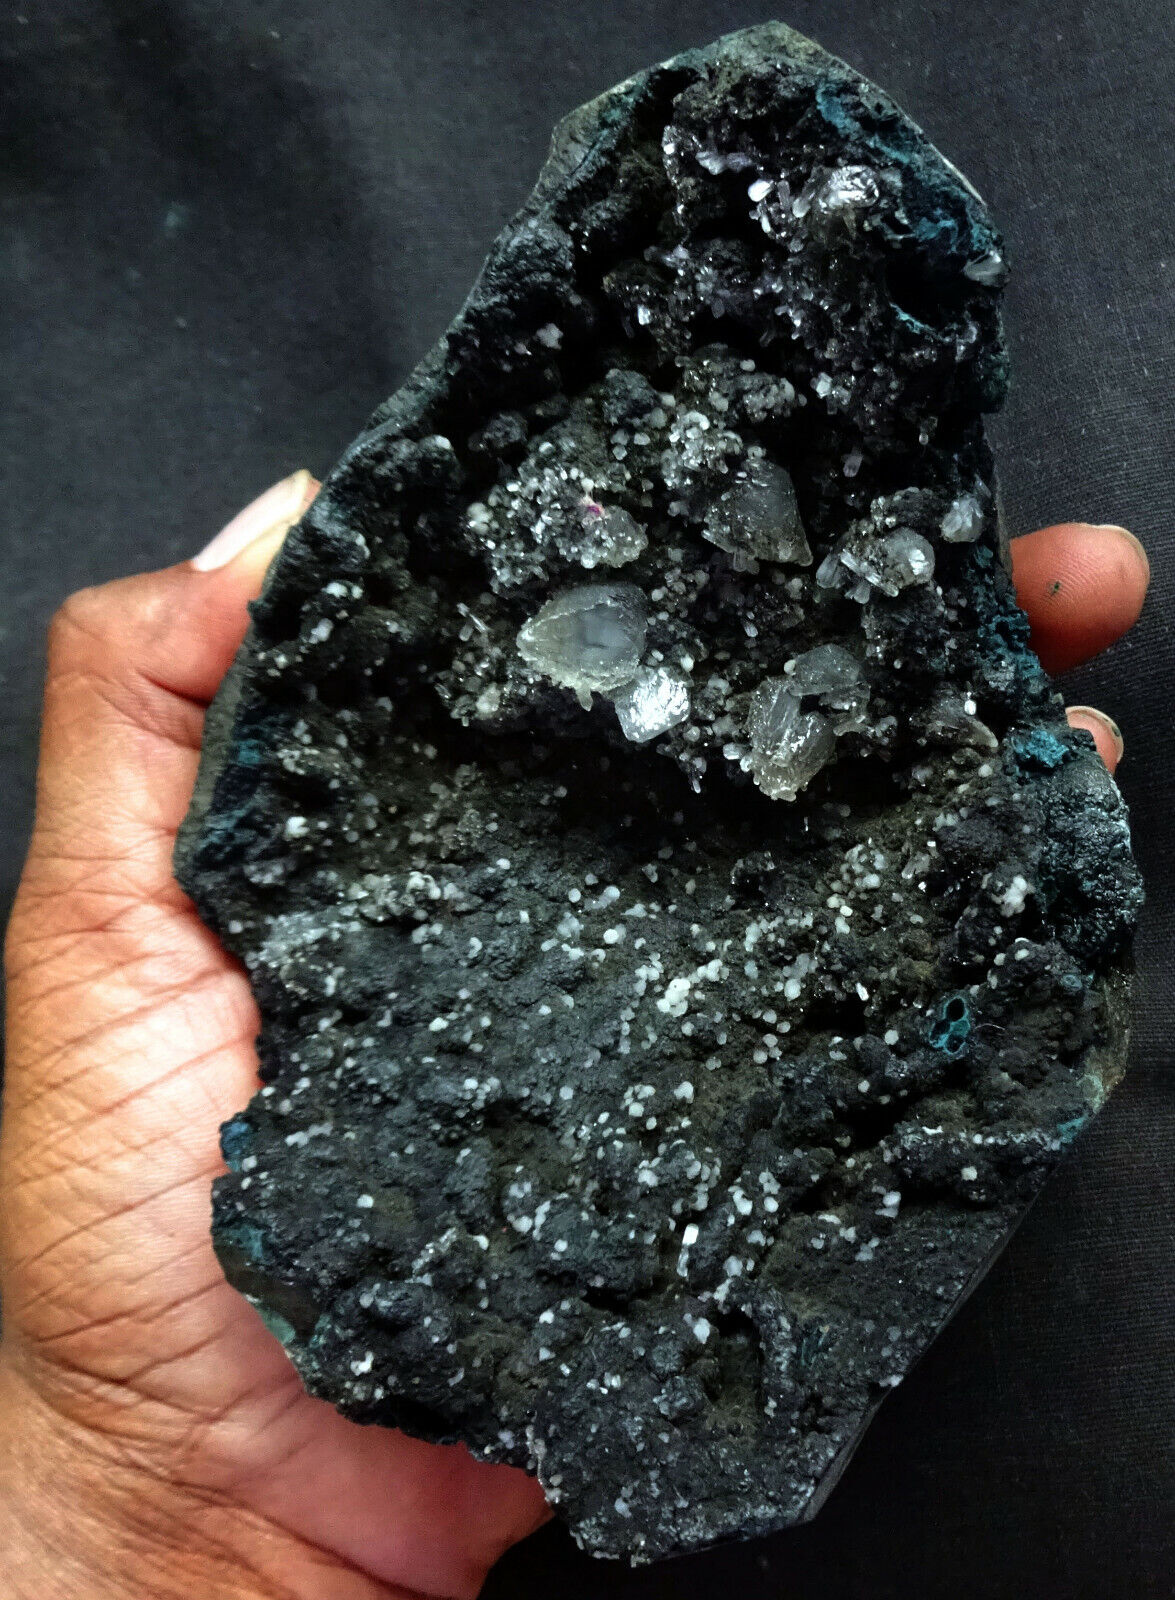 STUNNING POINTED CALCITE CRYSTALS IN BLACK CORAL CHALCEDONY FORMATION SEMI GEODE